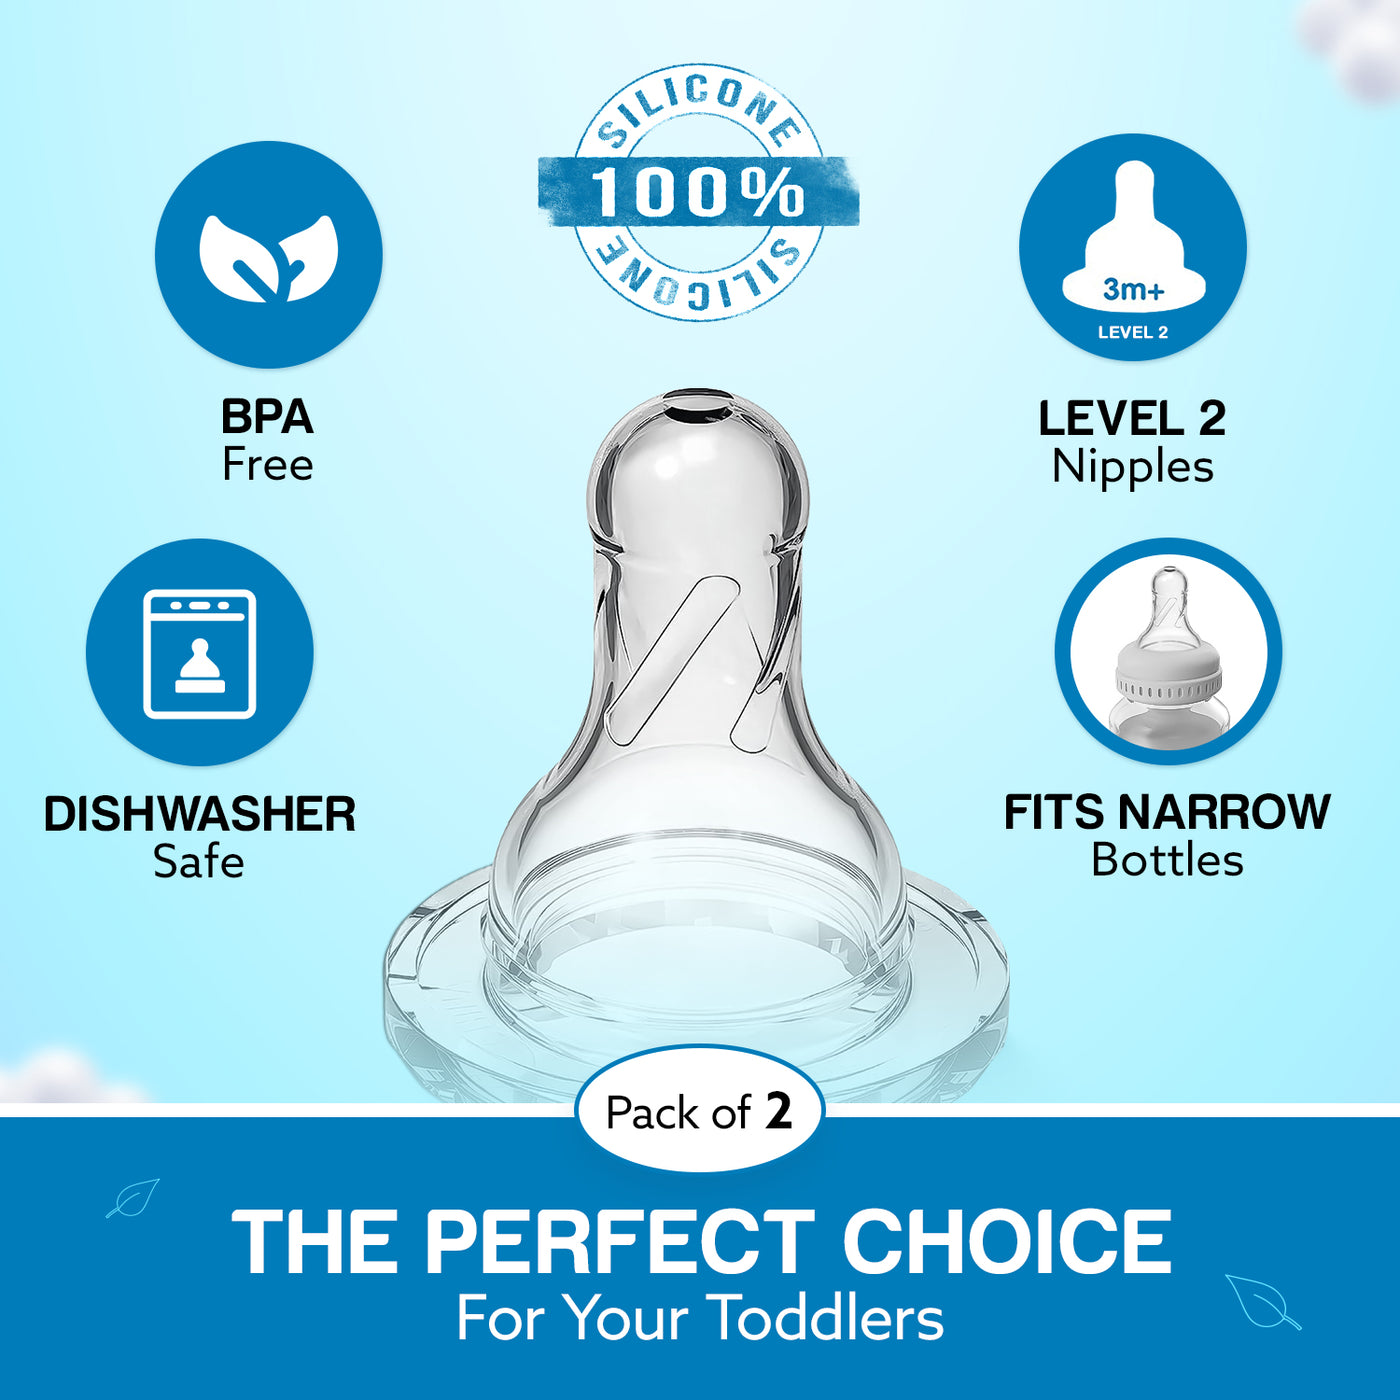 Baby-Proof Essentials 2-Pack Medium Flow Bottle Nipples - Level 2, 3+ Months, SkinSoft Silicone, Universally Fits Your Needs